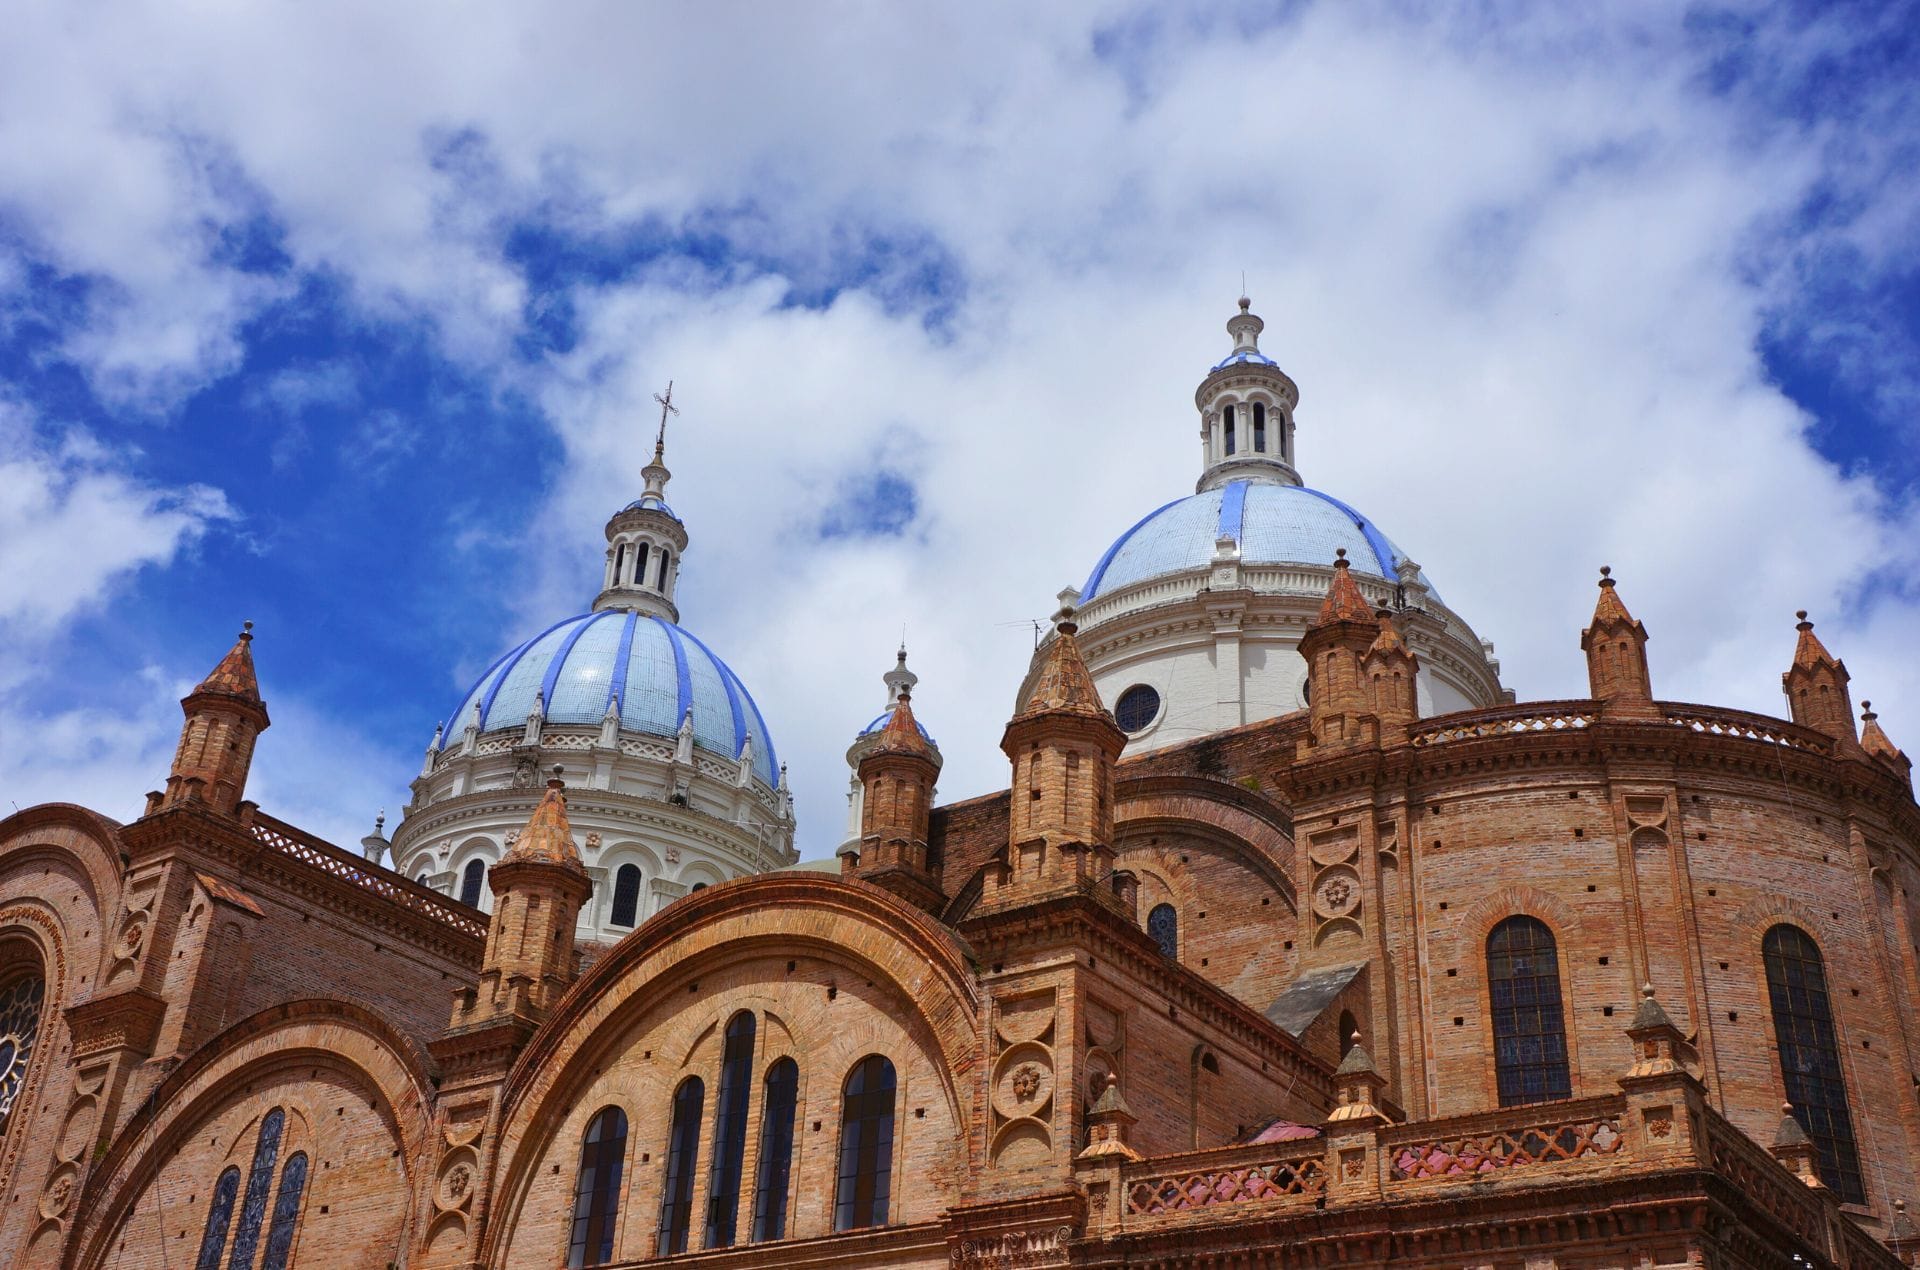 Cathedral of the Immaculate Conception in Cuenca, Ecuador